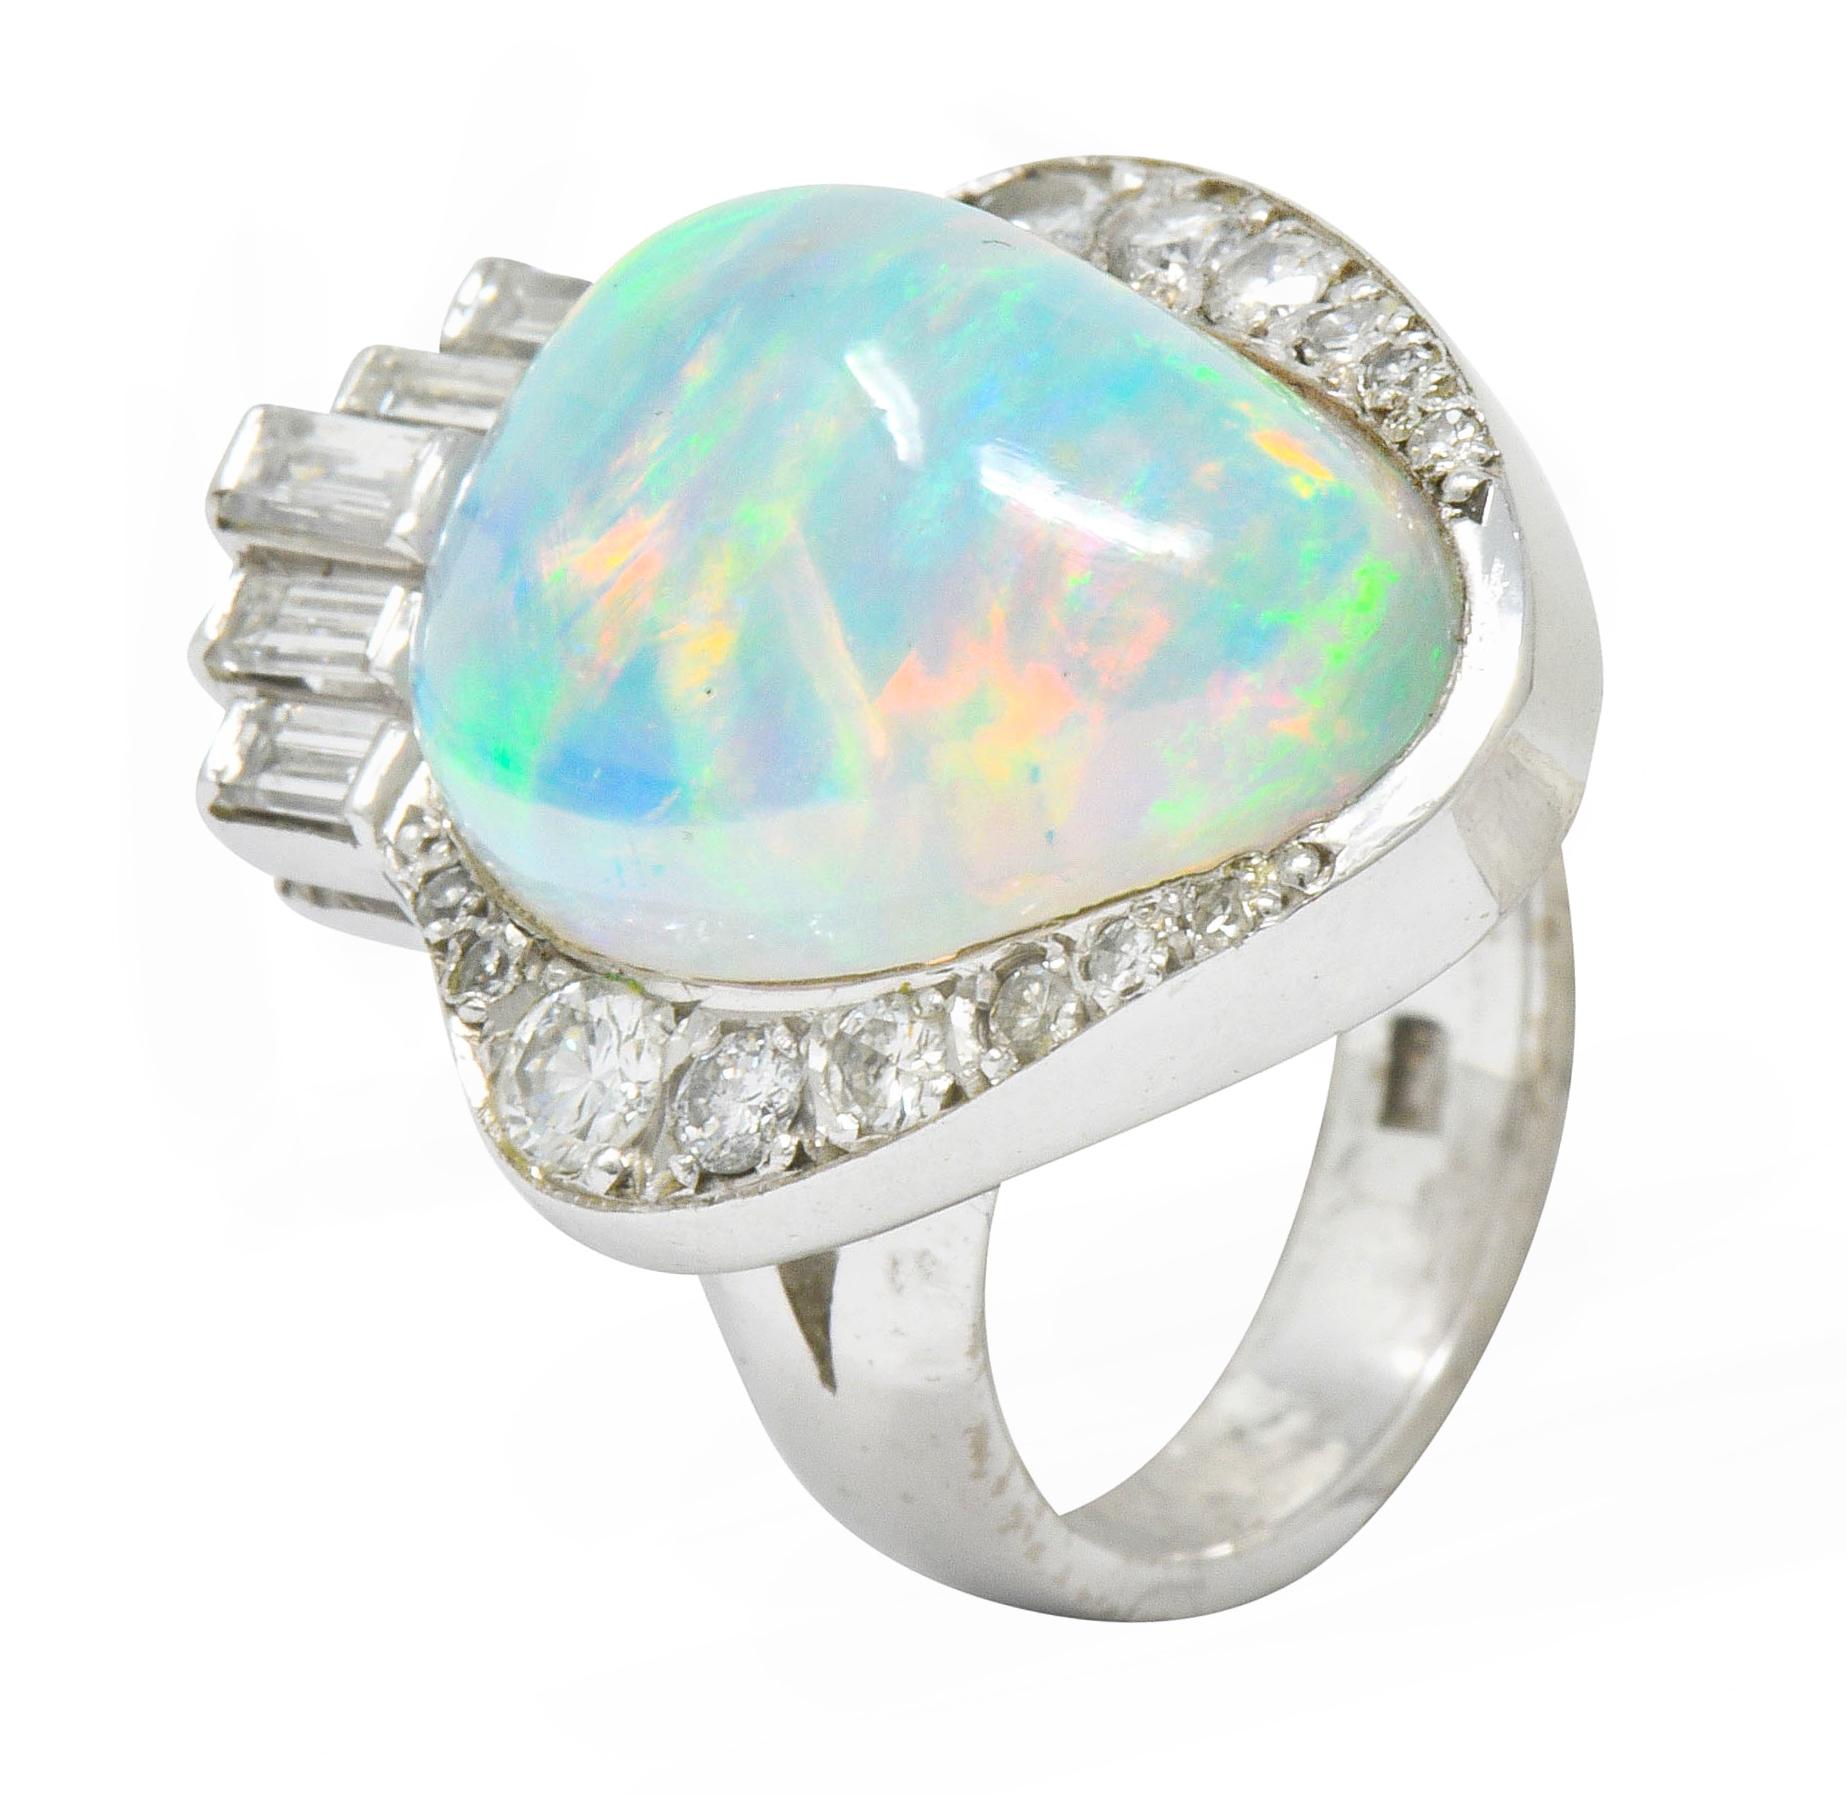 Ethereal Opal Cabochon Diamond 14 Karat White Gold Cocktail Ring 4